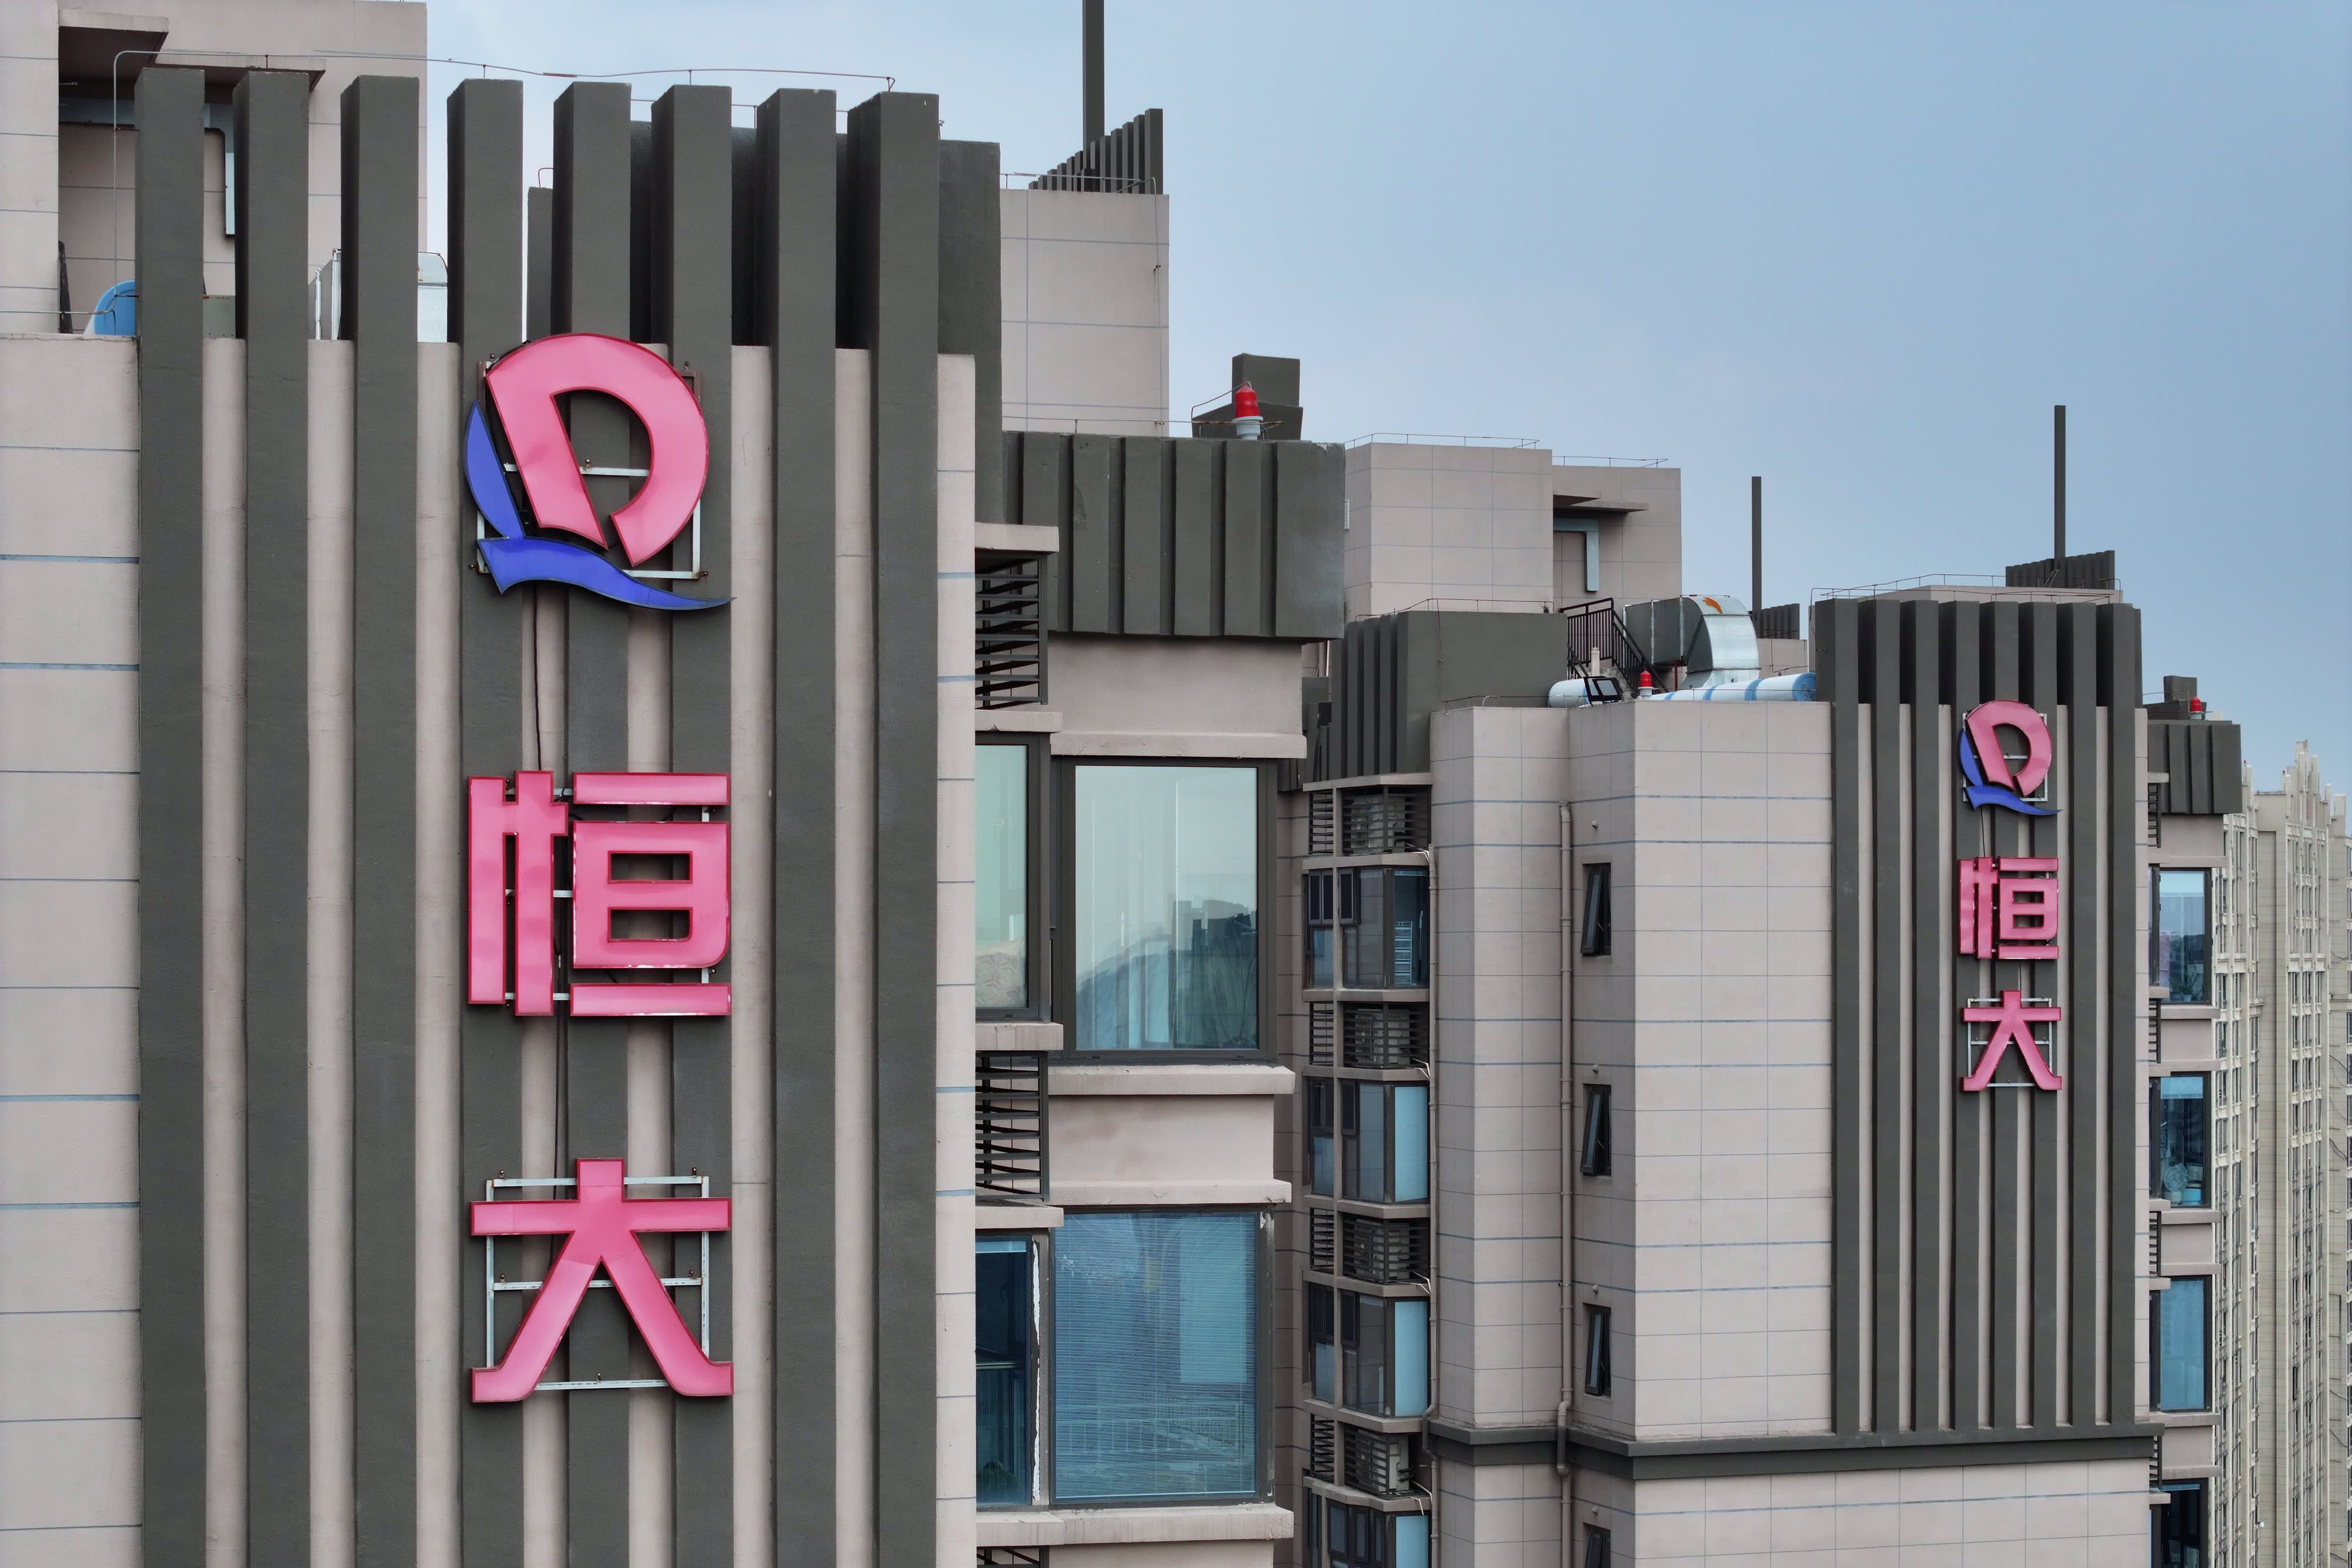 Chinese property stocks rose after Country Garden avoided a default